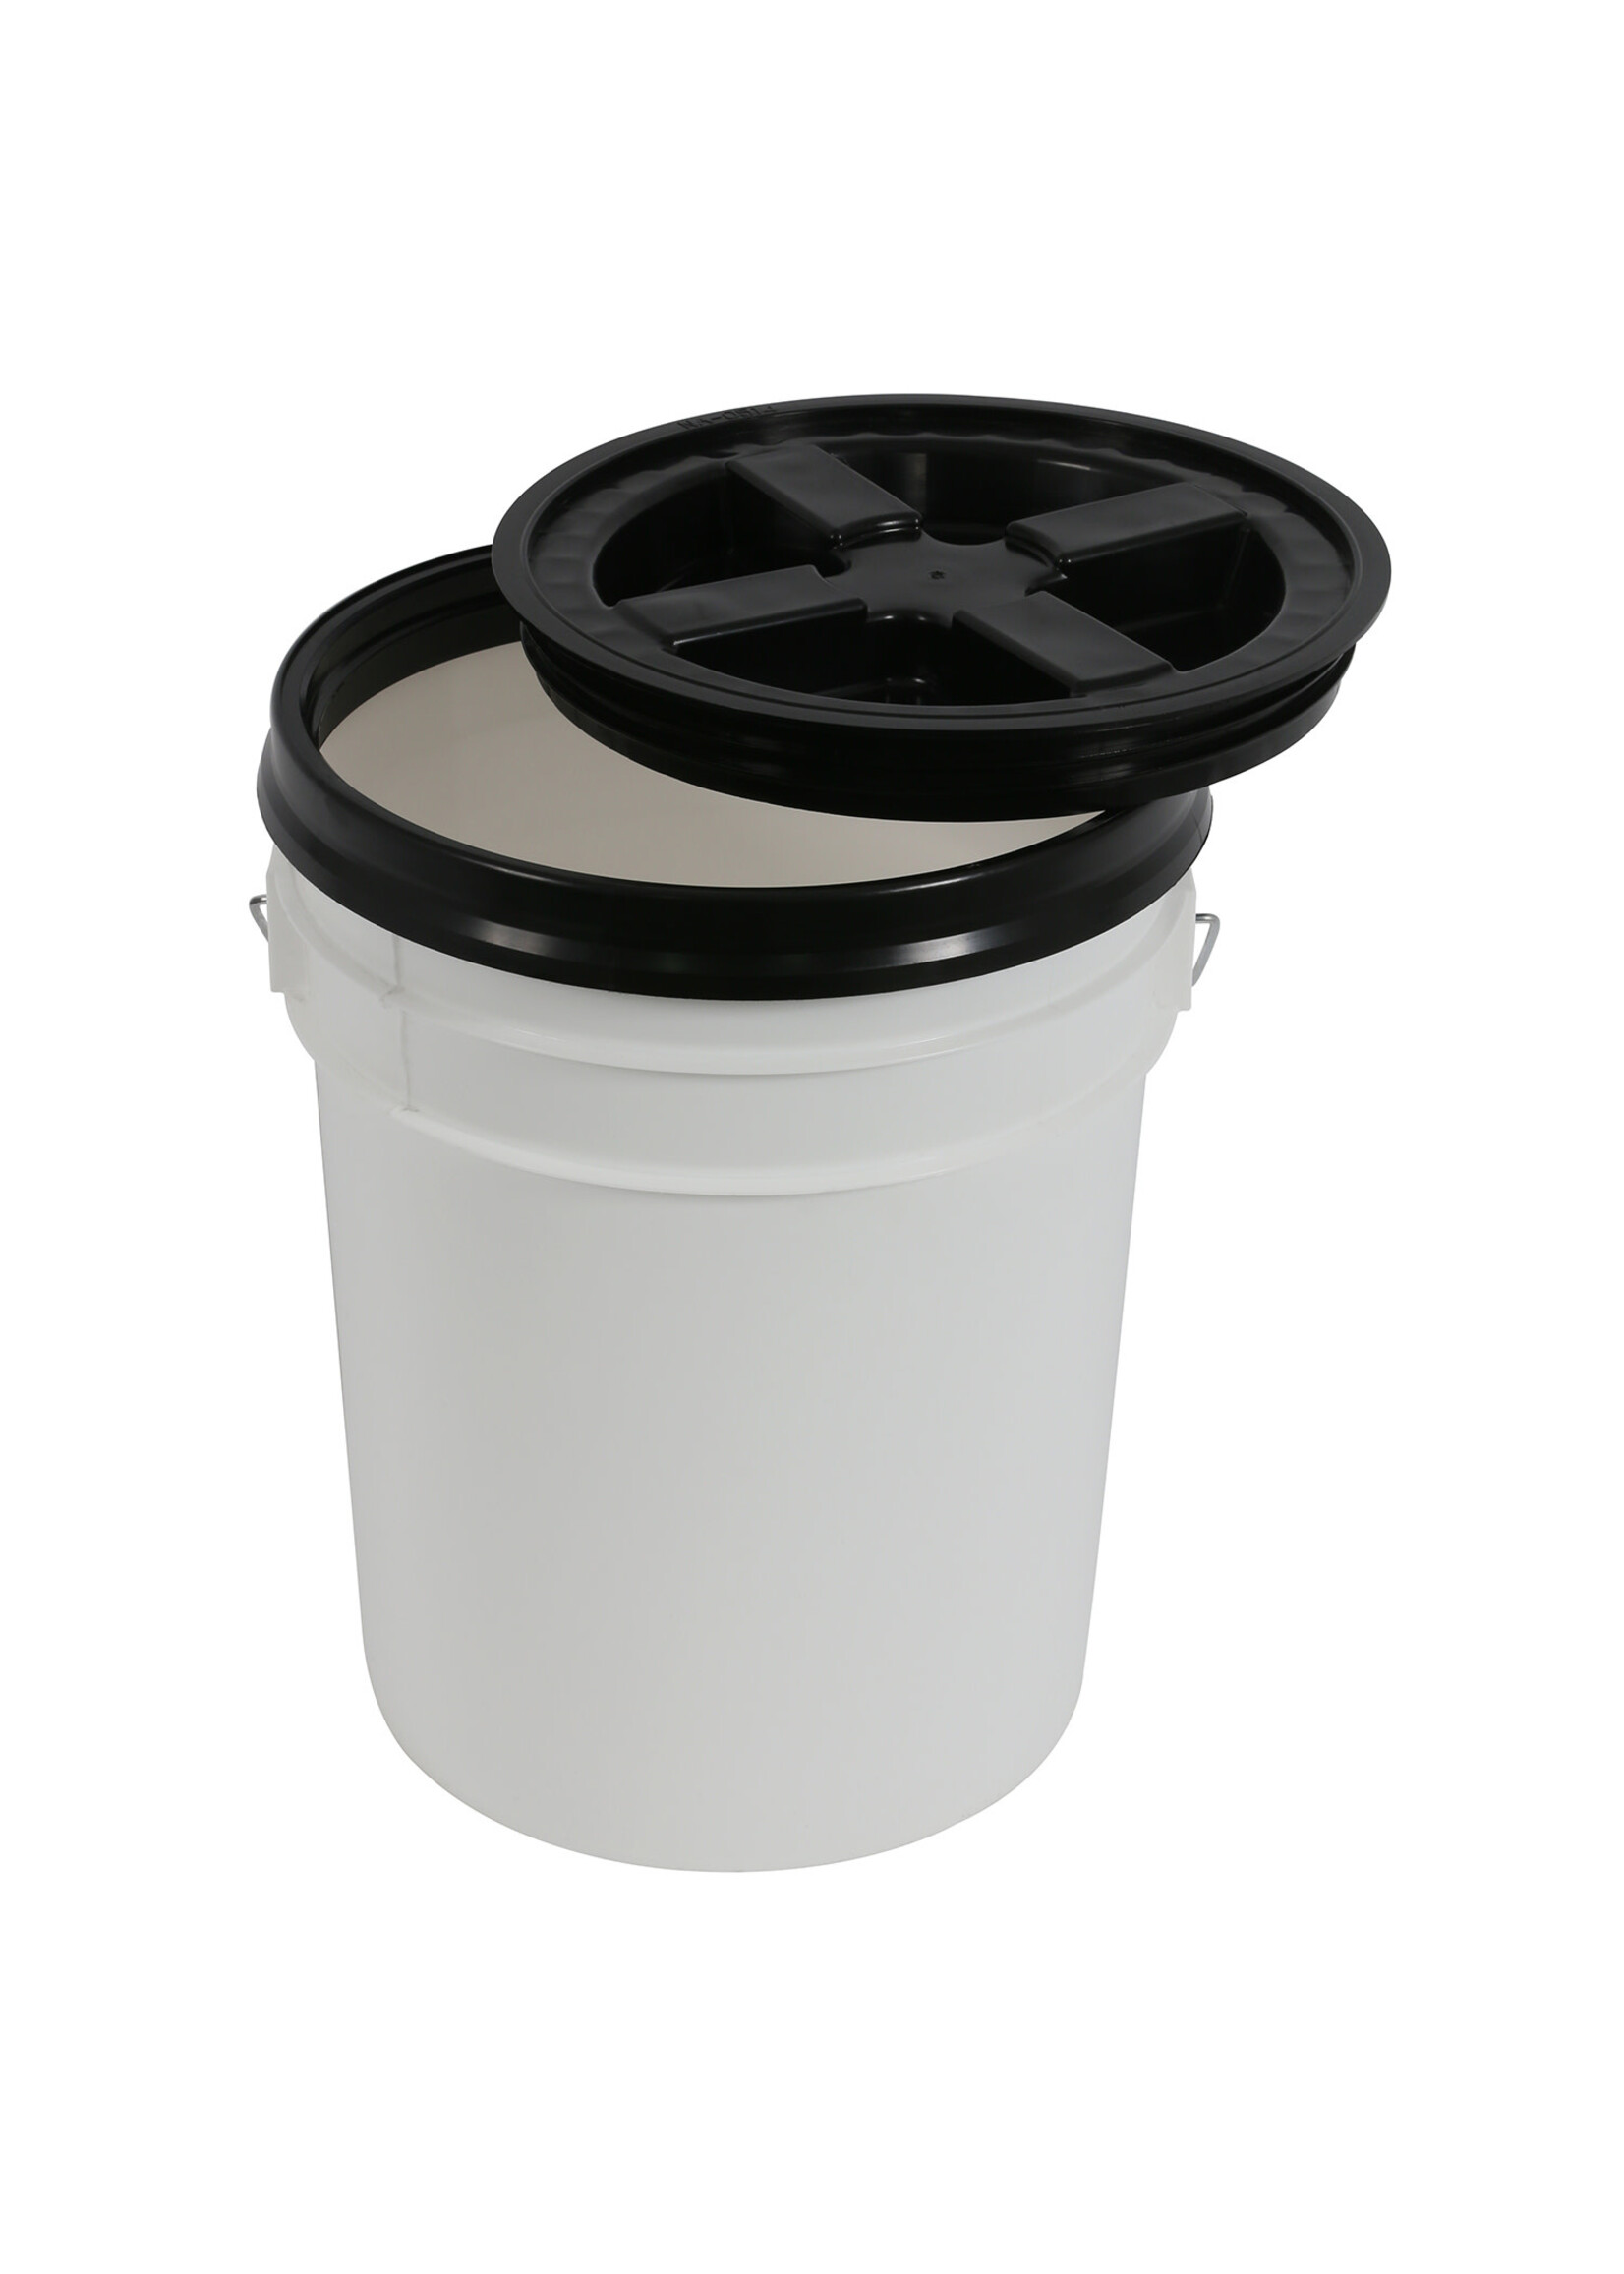 Gamma Seal Lid for 3.5 and 5 Gallon Buckets